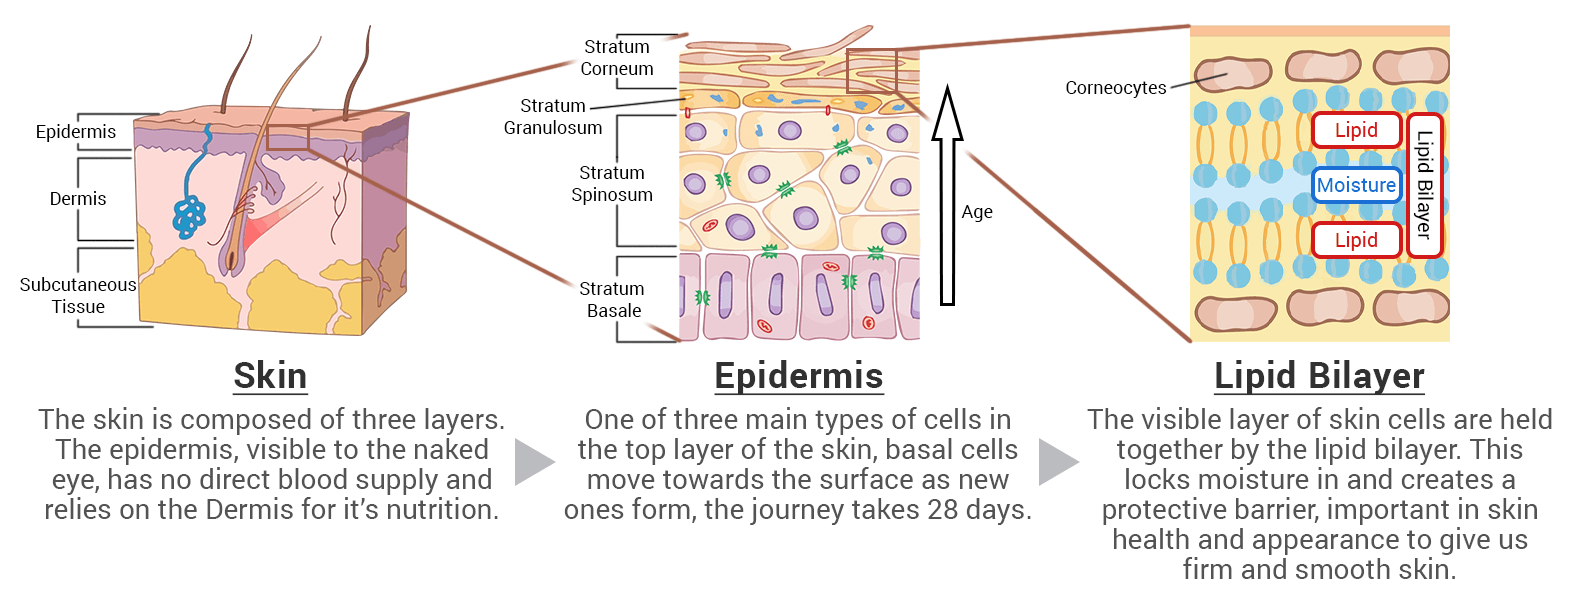 Structure of skin